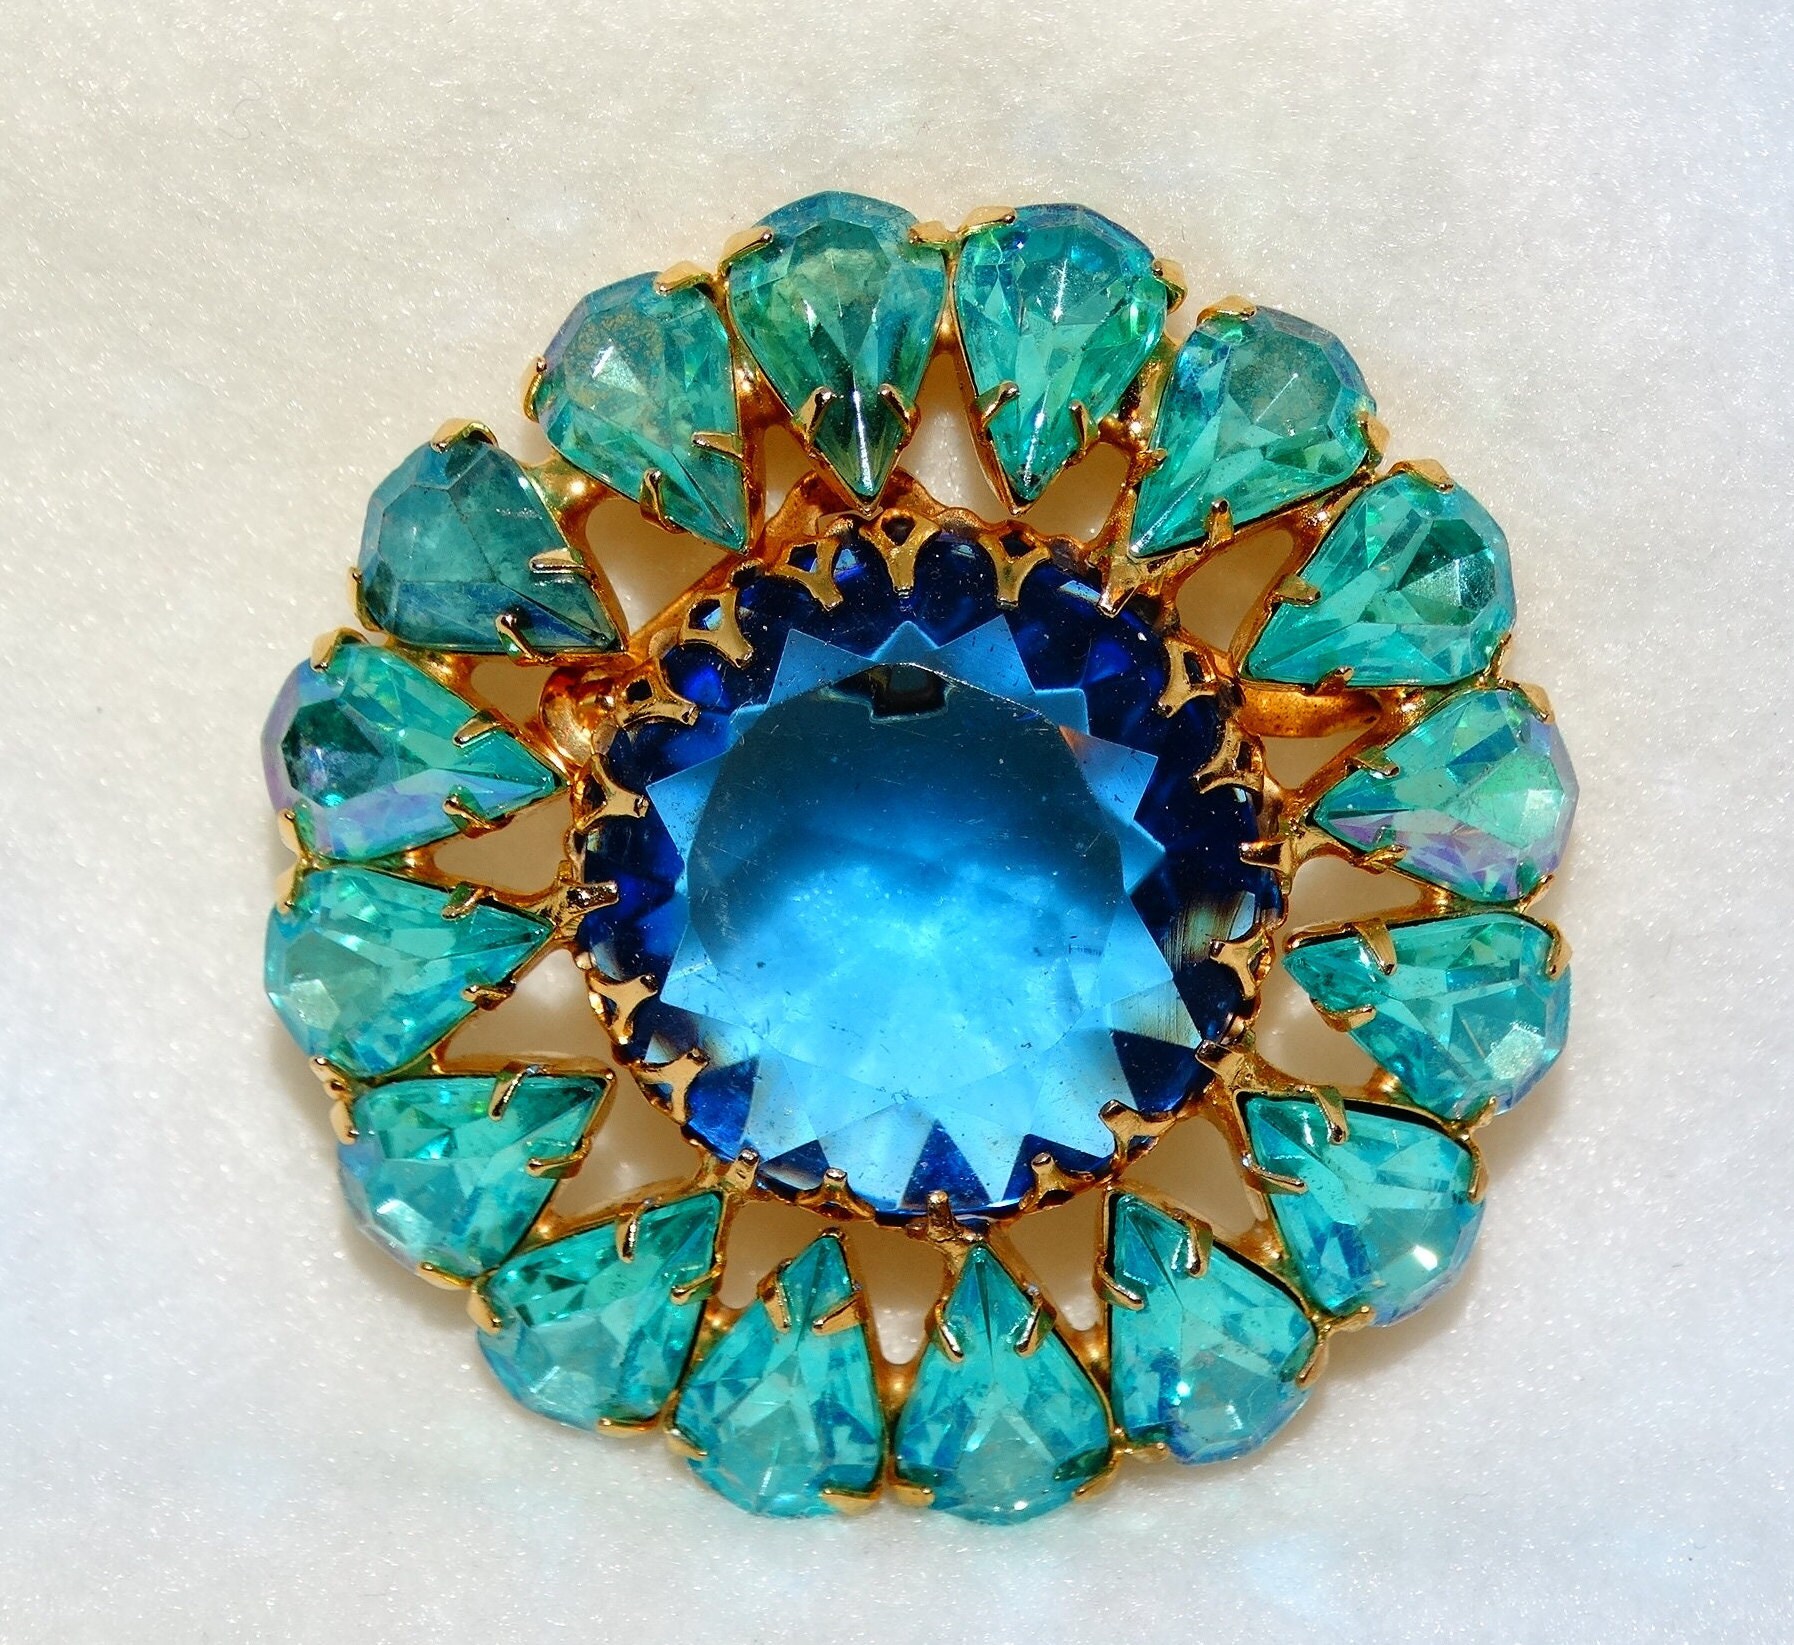 Aqua Open Flower Brooch with Aqua Blue and Green Rhinestones in The Center of Lovely Curled Petals Lined with Clear Rhinestones